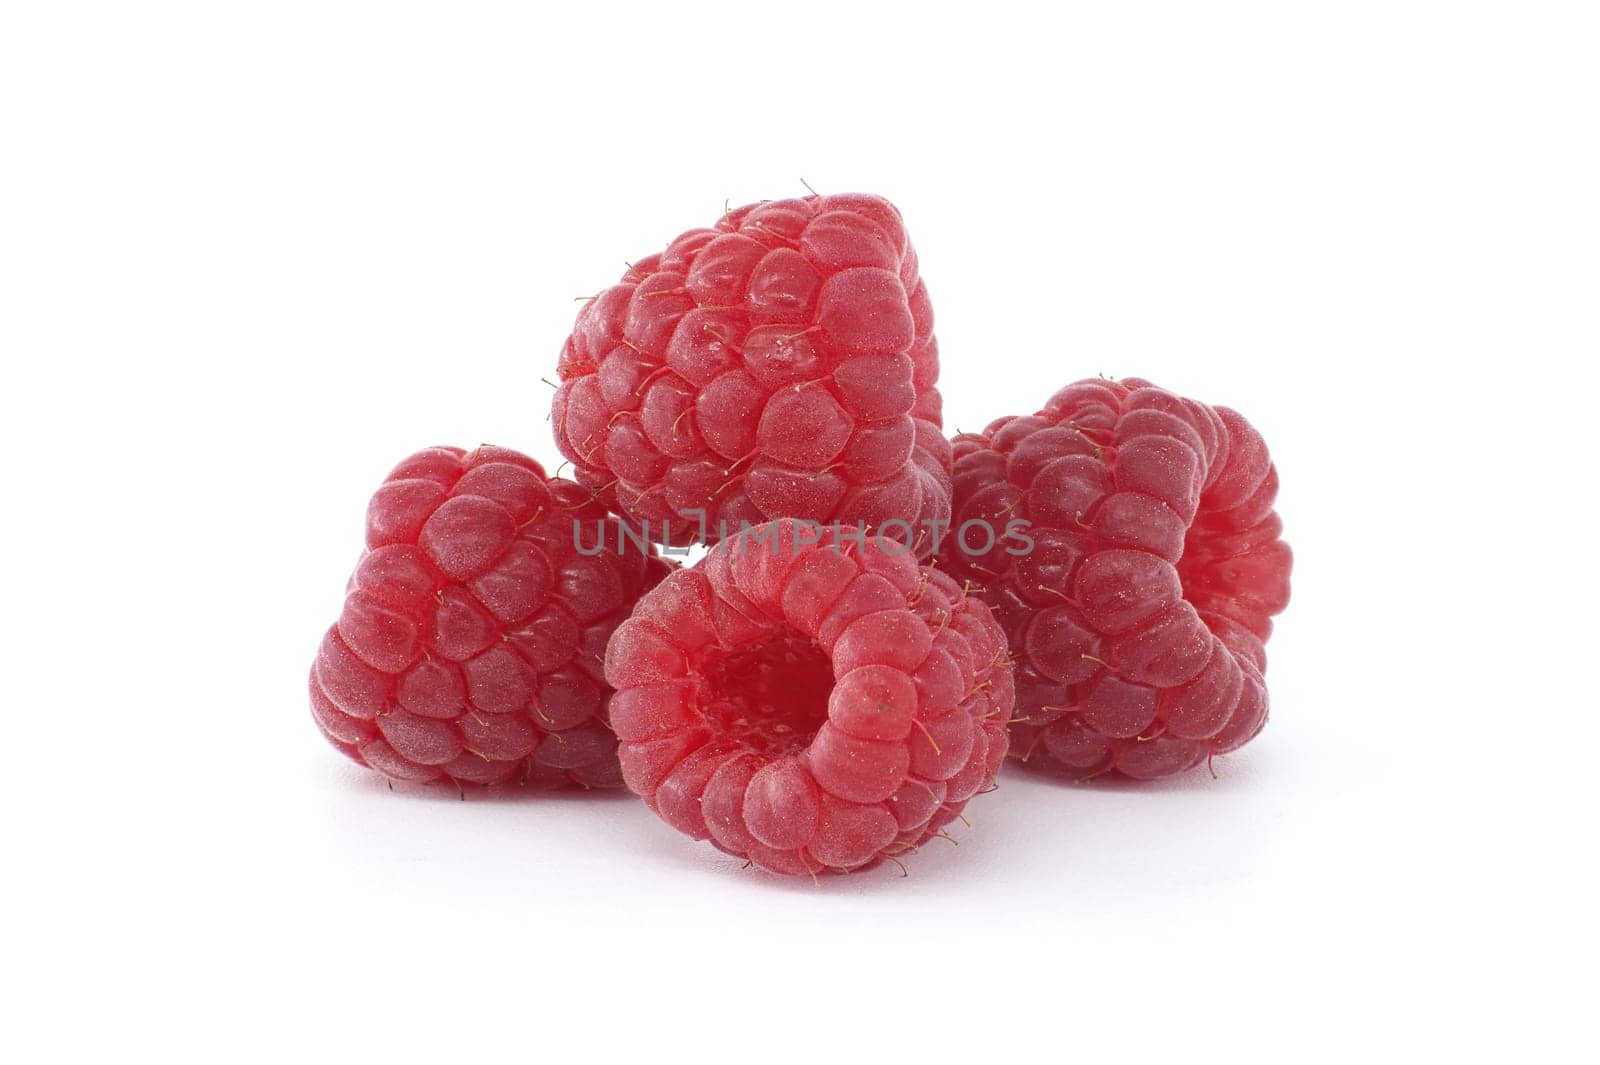 Raspberry berries isolated on white background by NetPix